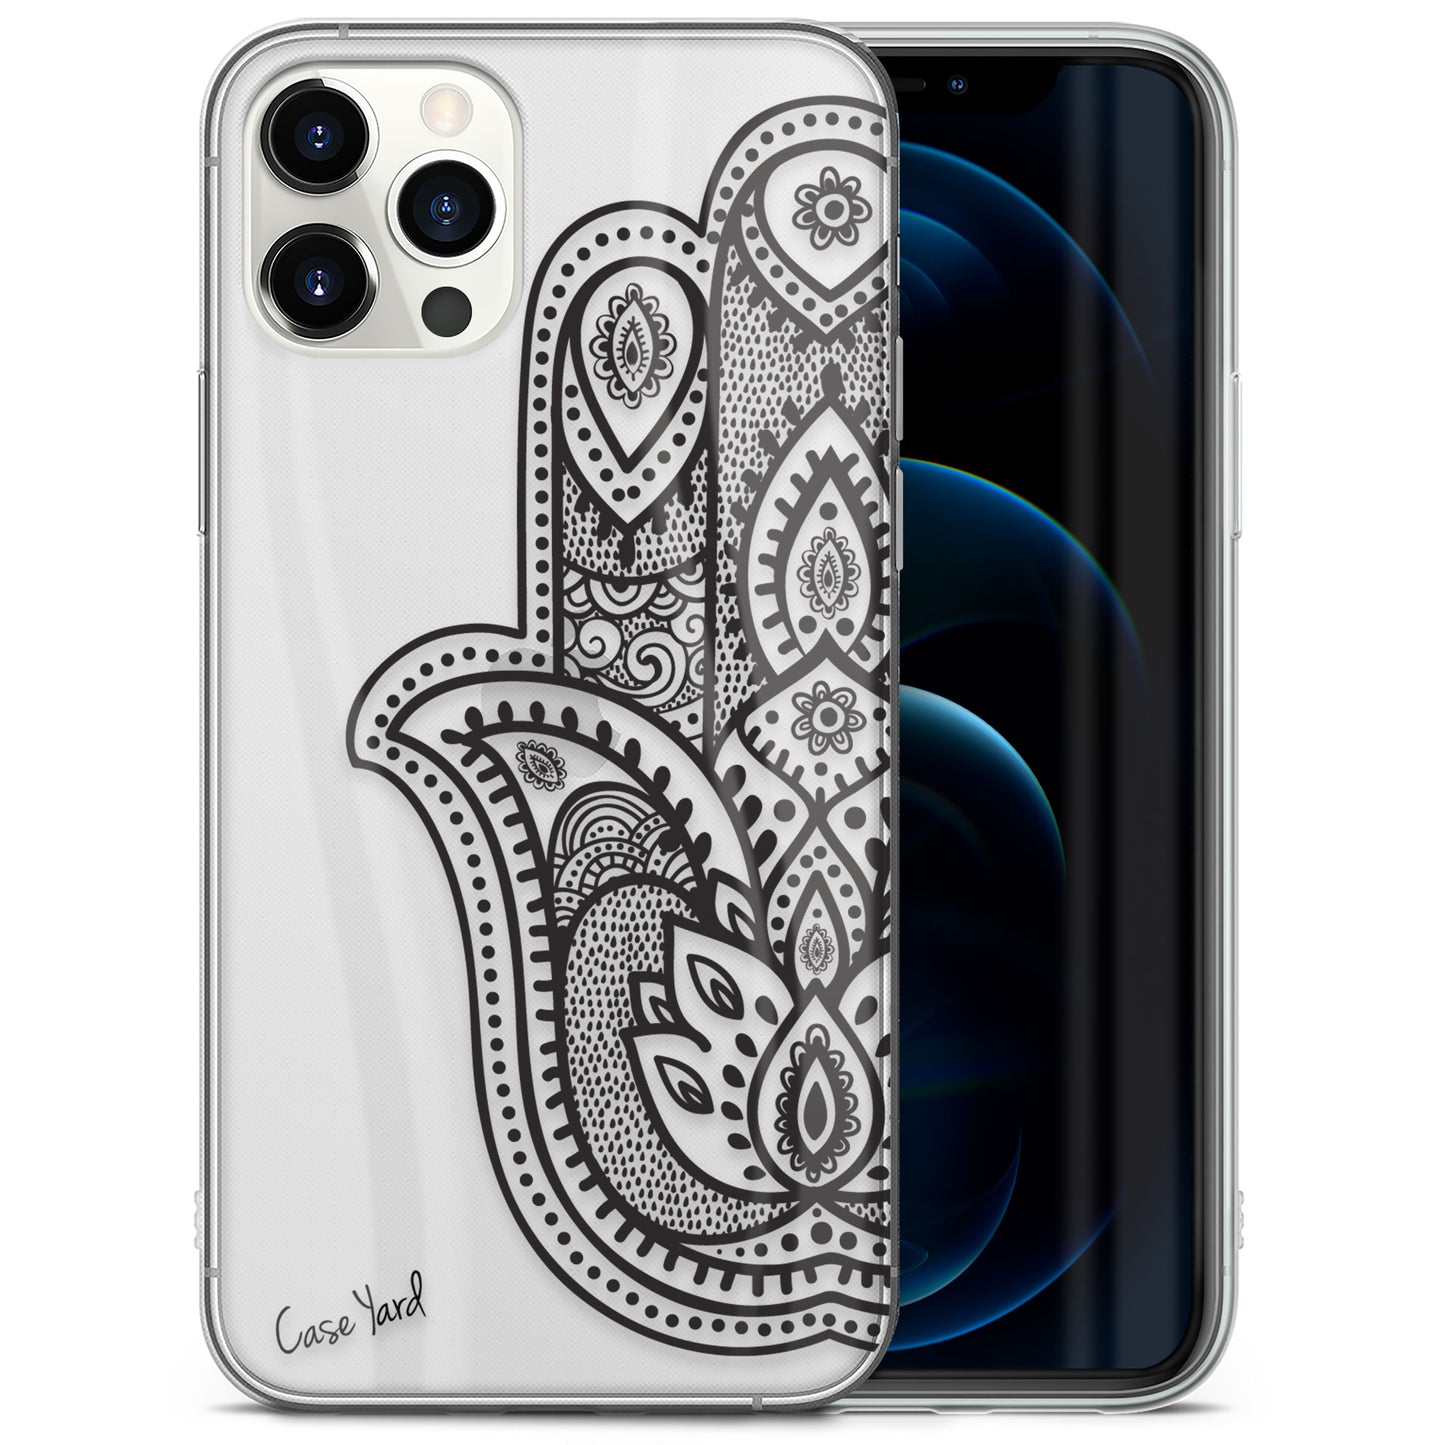 TPU Clear case with (Half Hamsa Hand) Design for iPhone & Samsung Phones